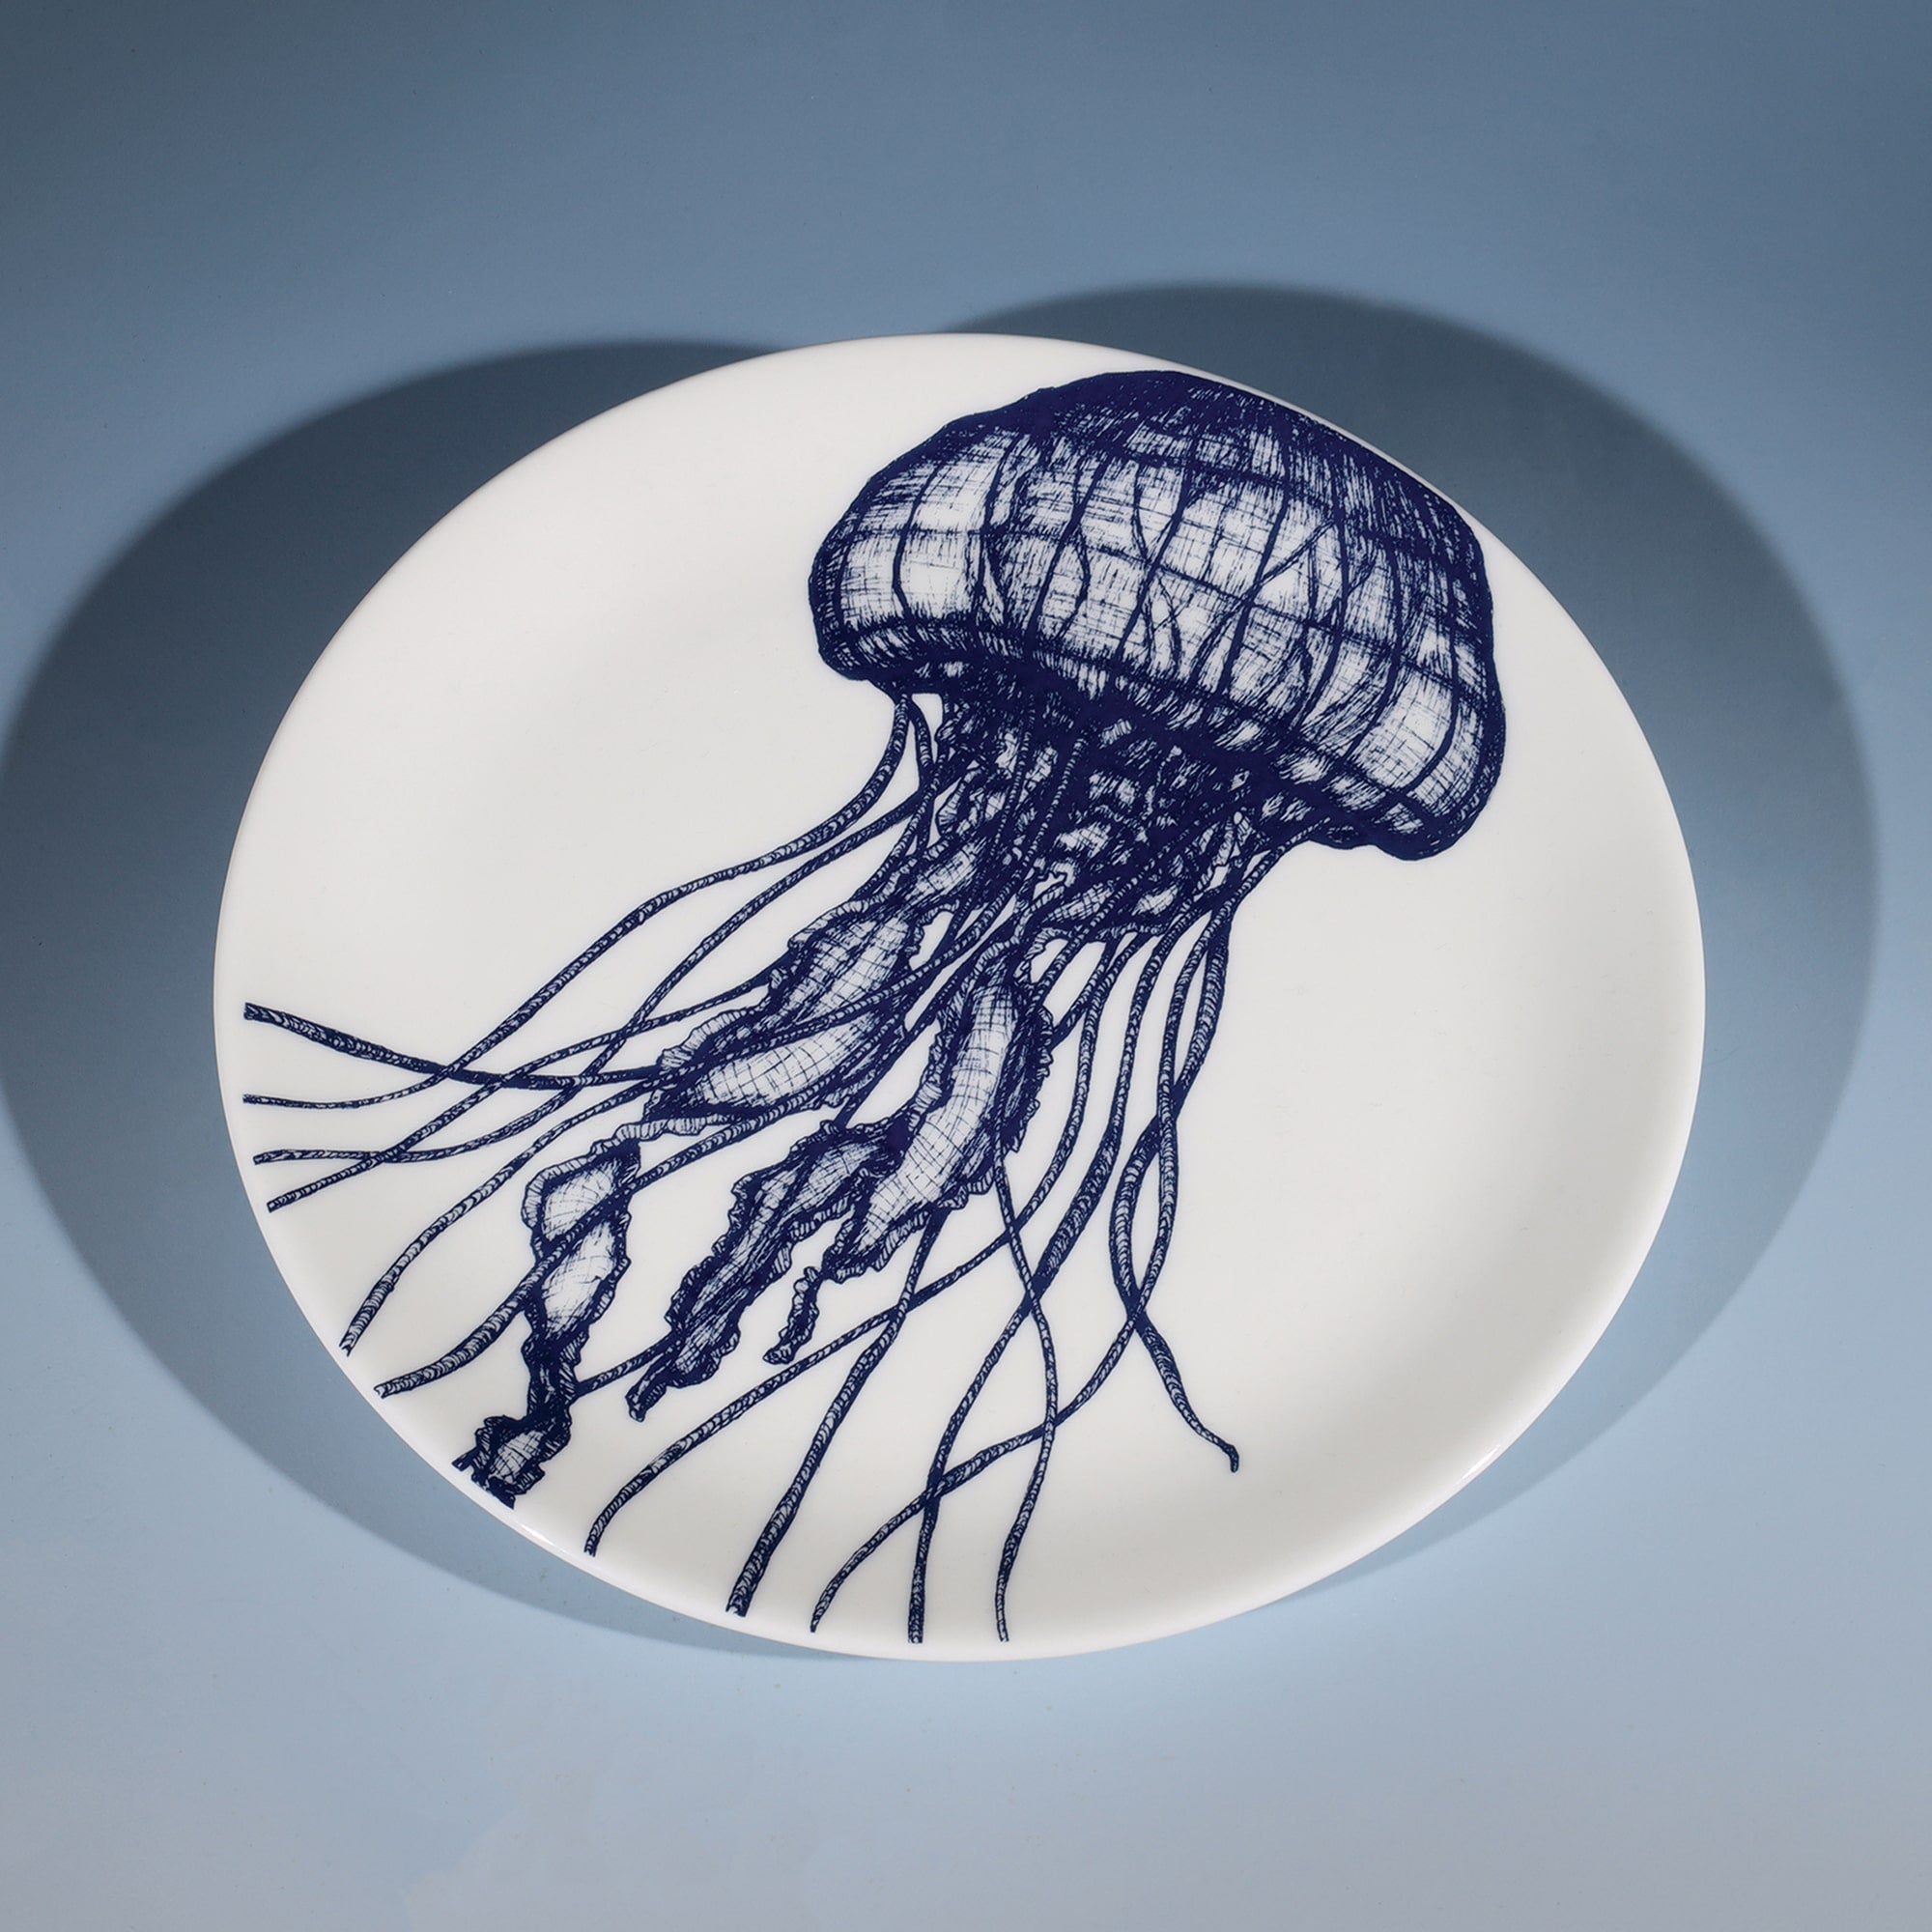 Bone China White  plate with hand drawn illustration our classic Jellyfish in Navy.